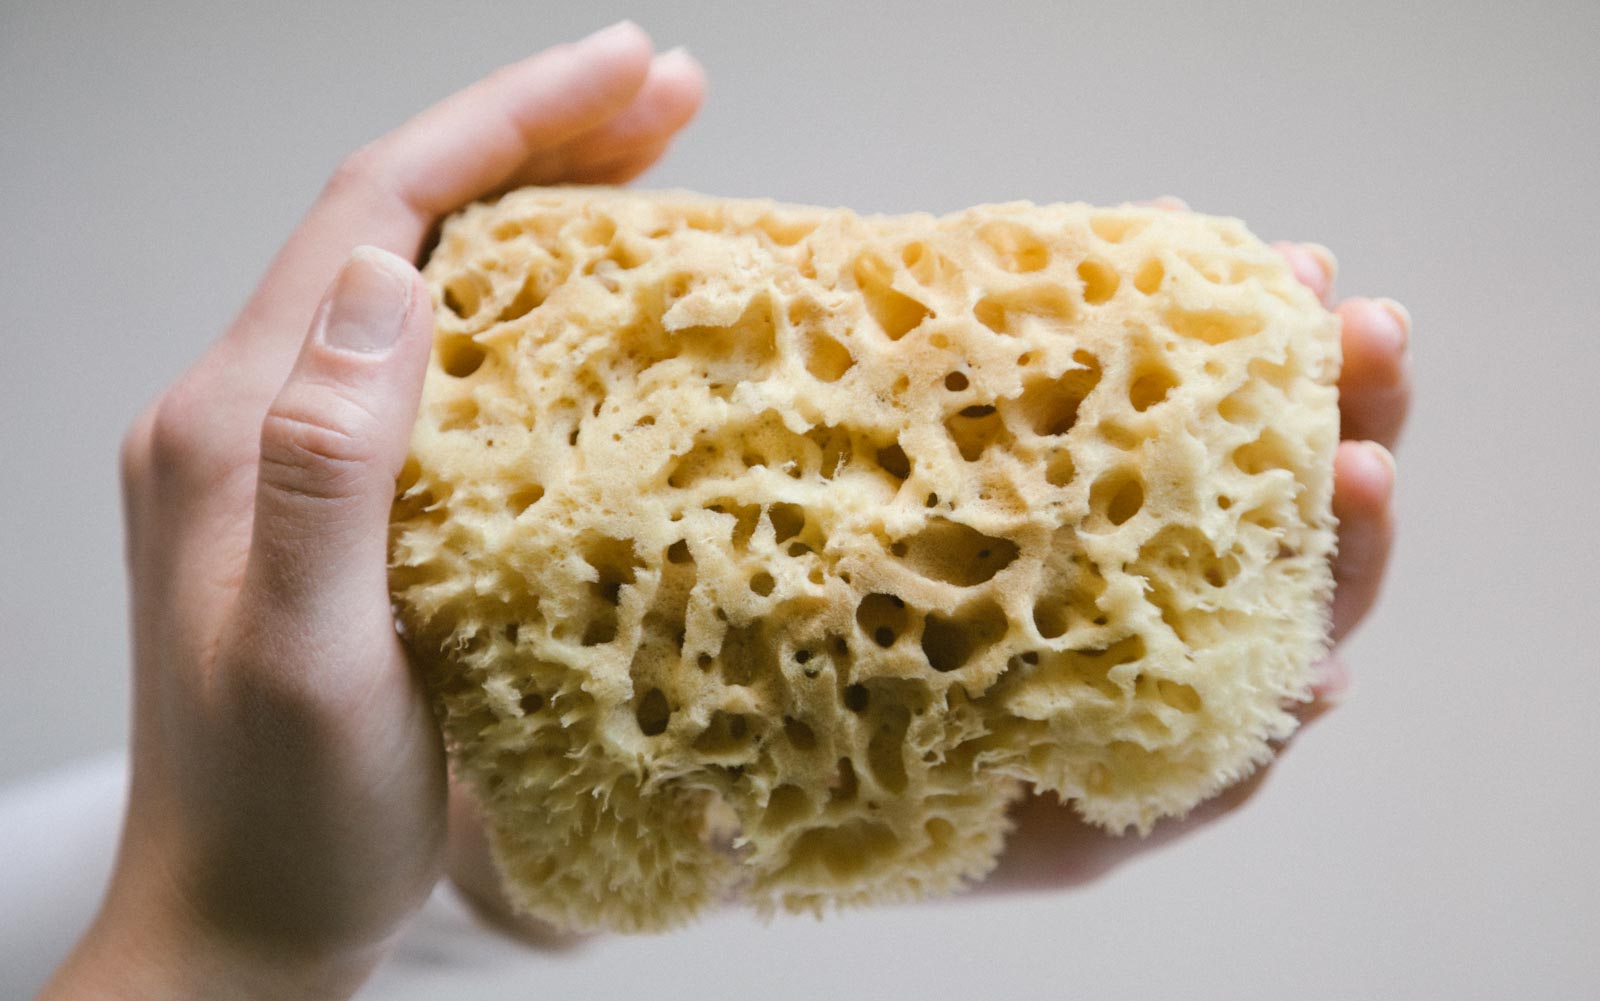 Buy natural sea sponges for your body online